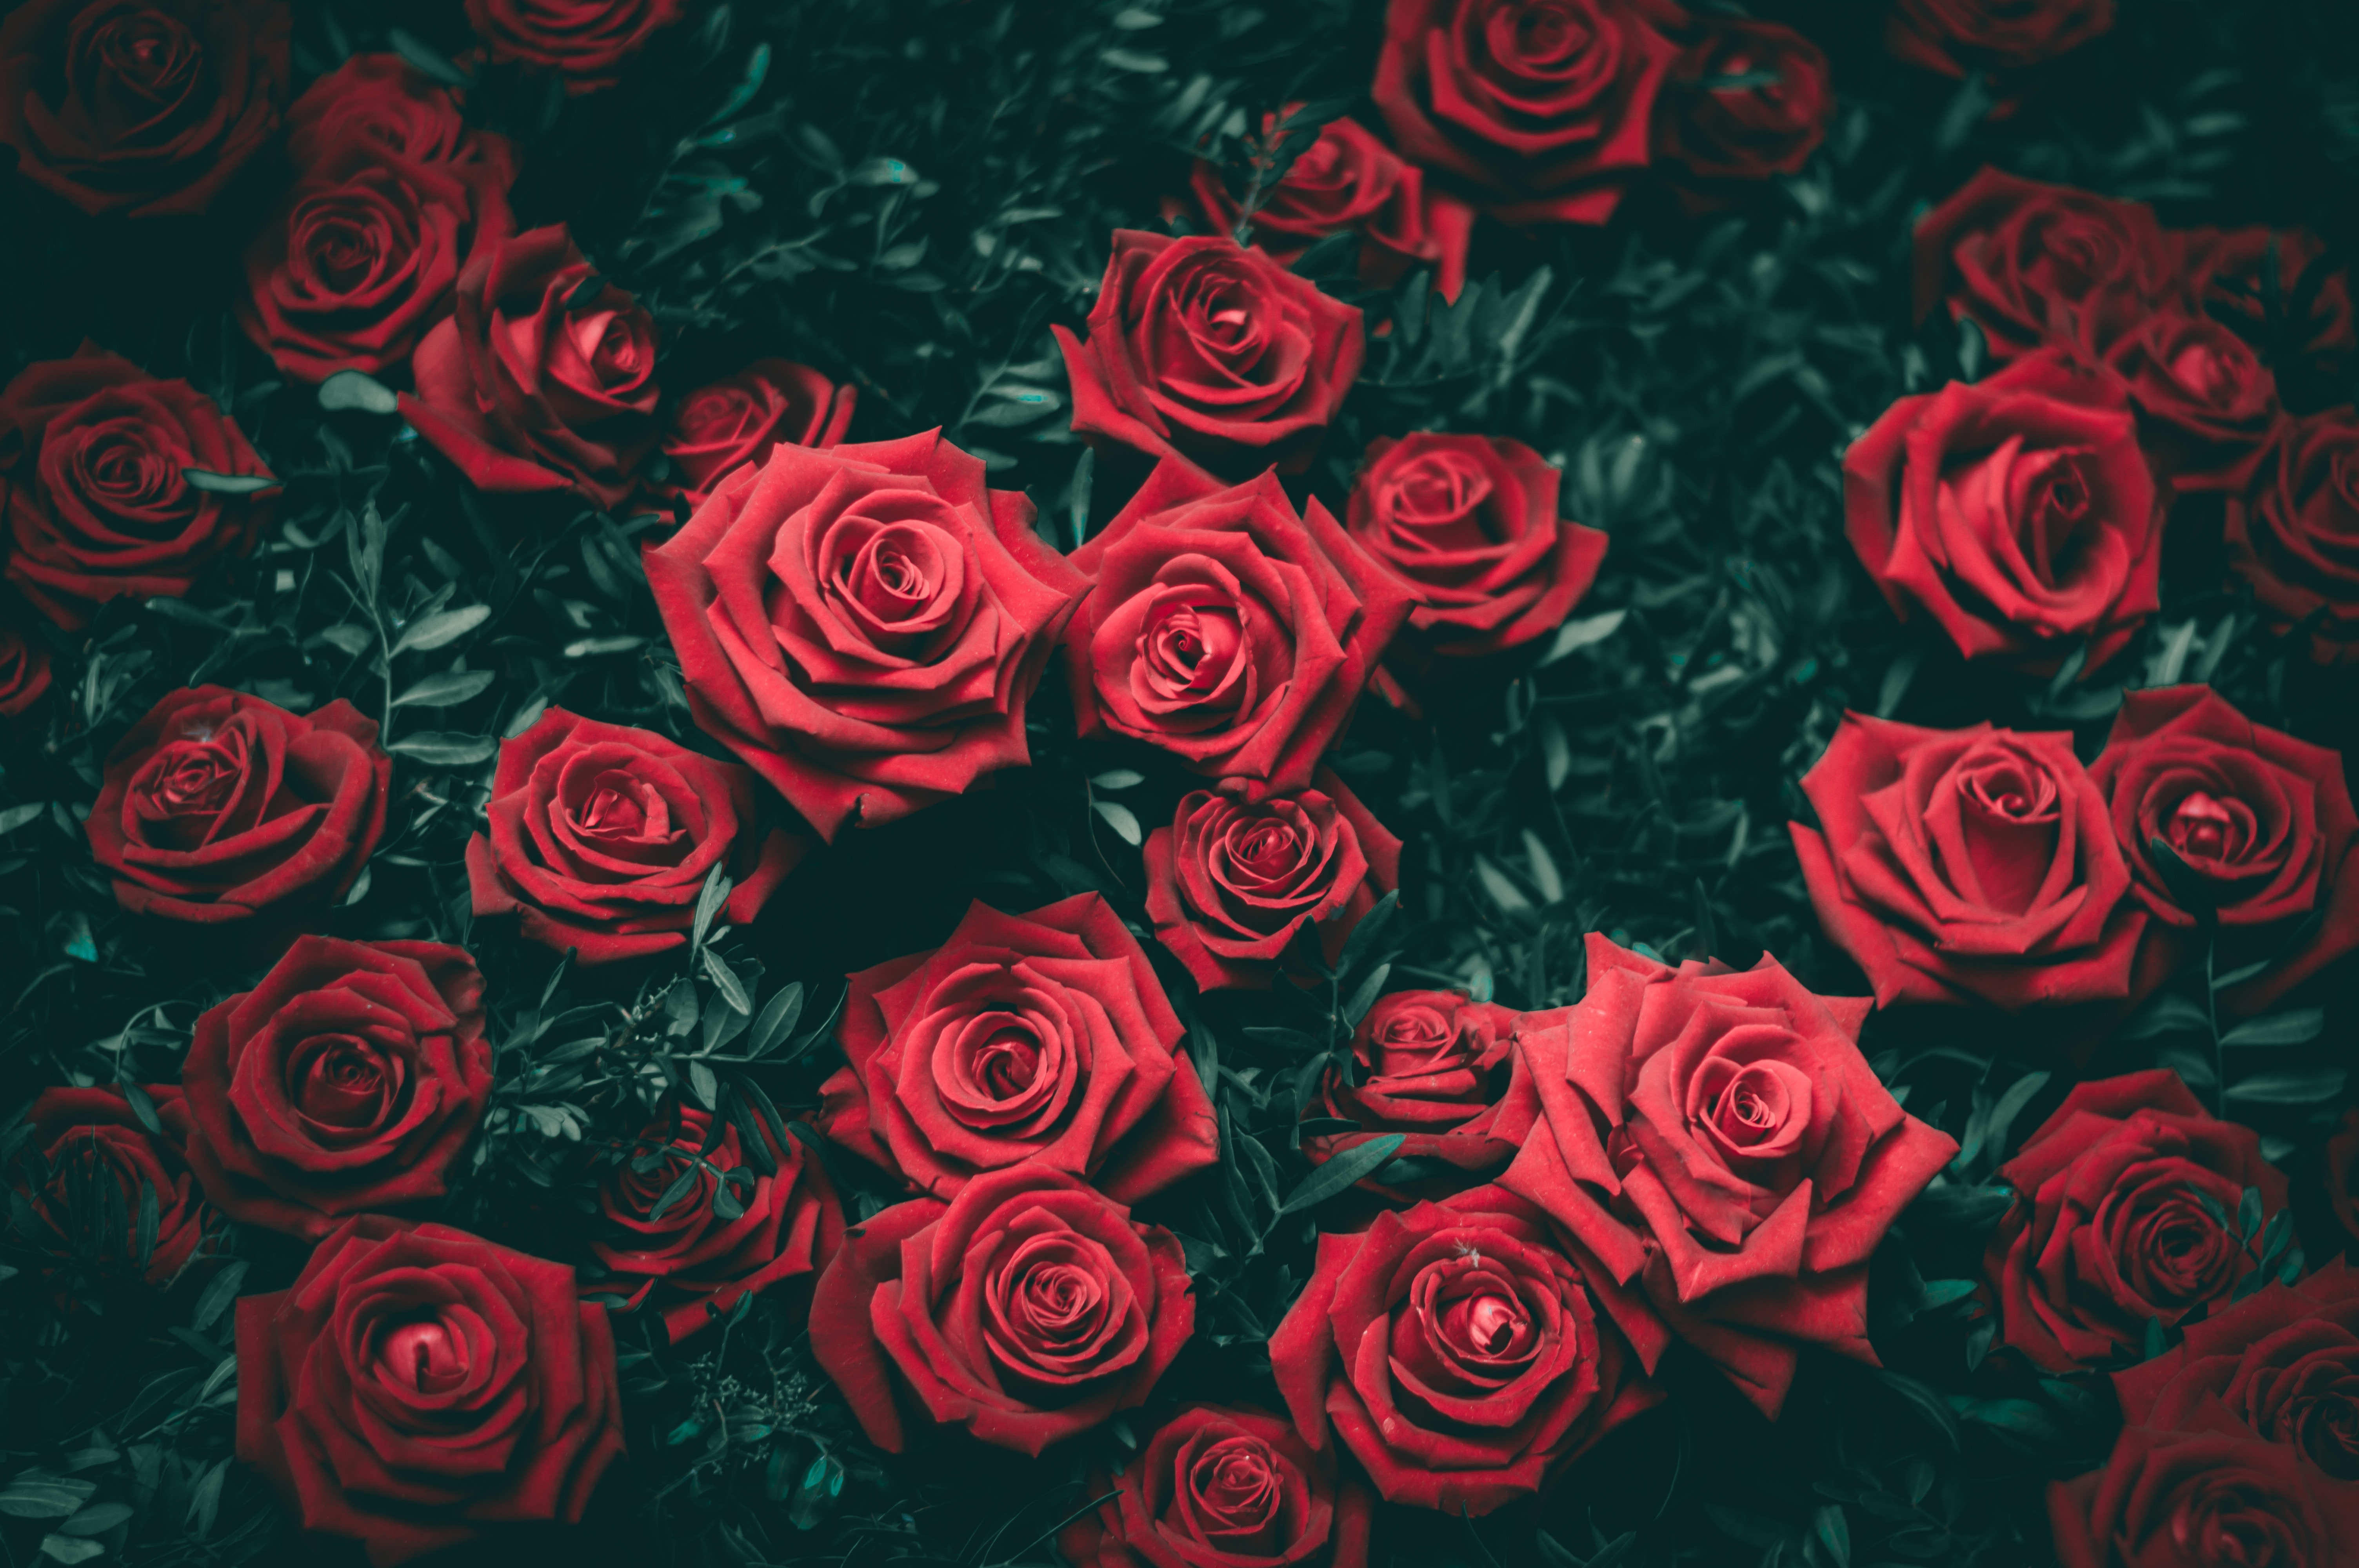 Rose Flower Background Image By Freetoedit Images